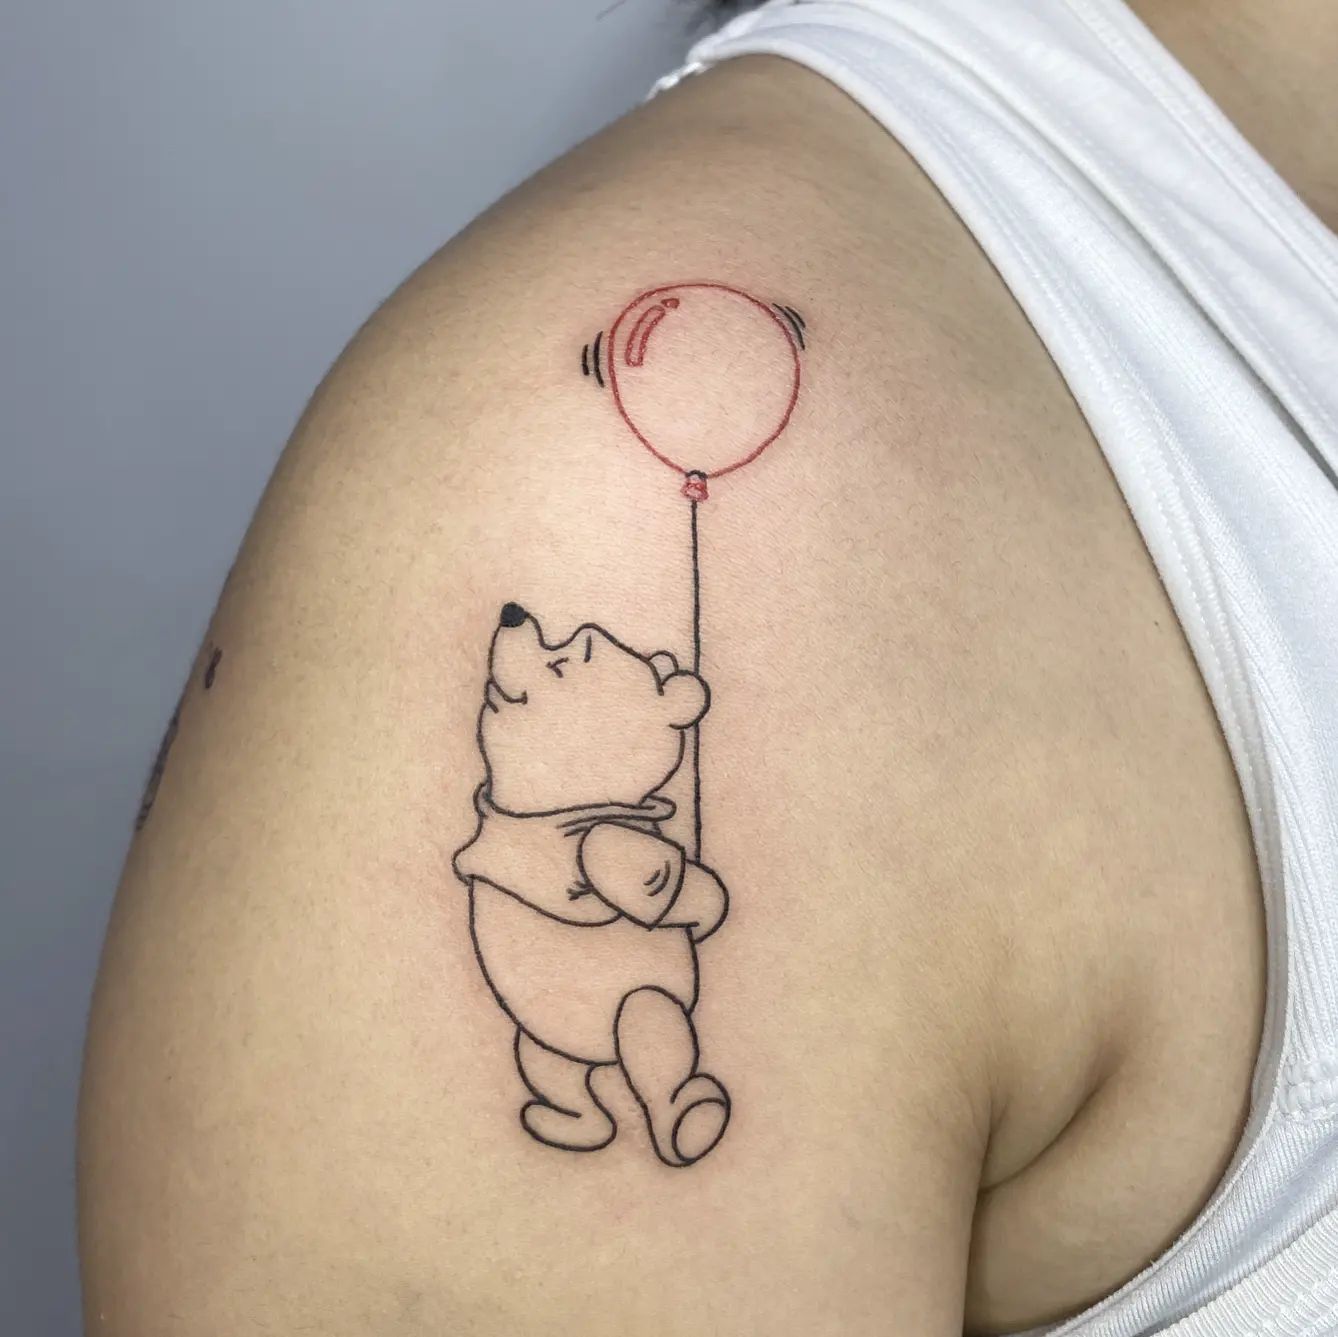 If Winnie was your favorite character while growing up you’re going to like this cute and small black ink shoulder tattoo.